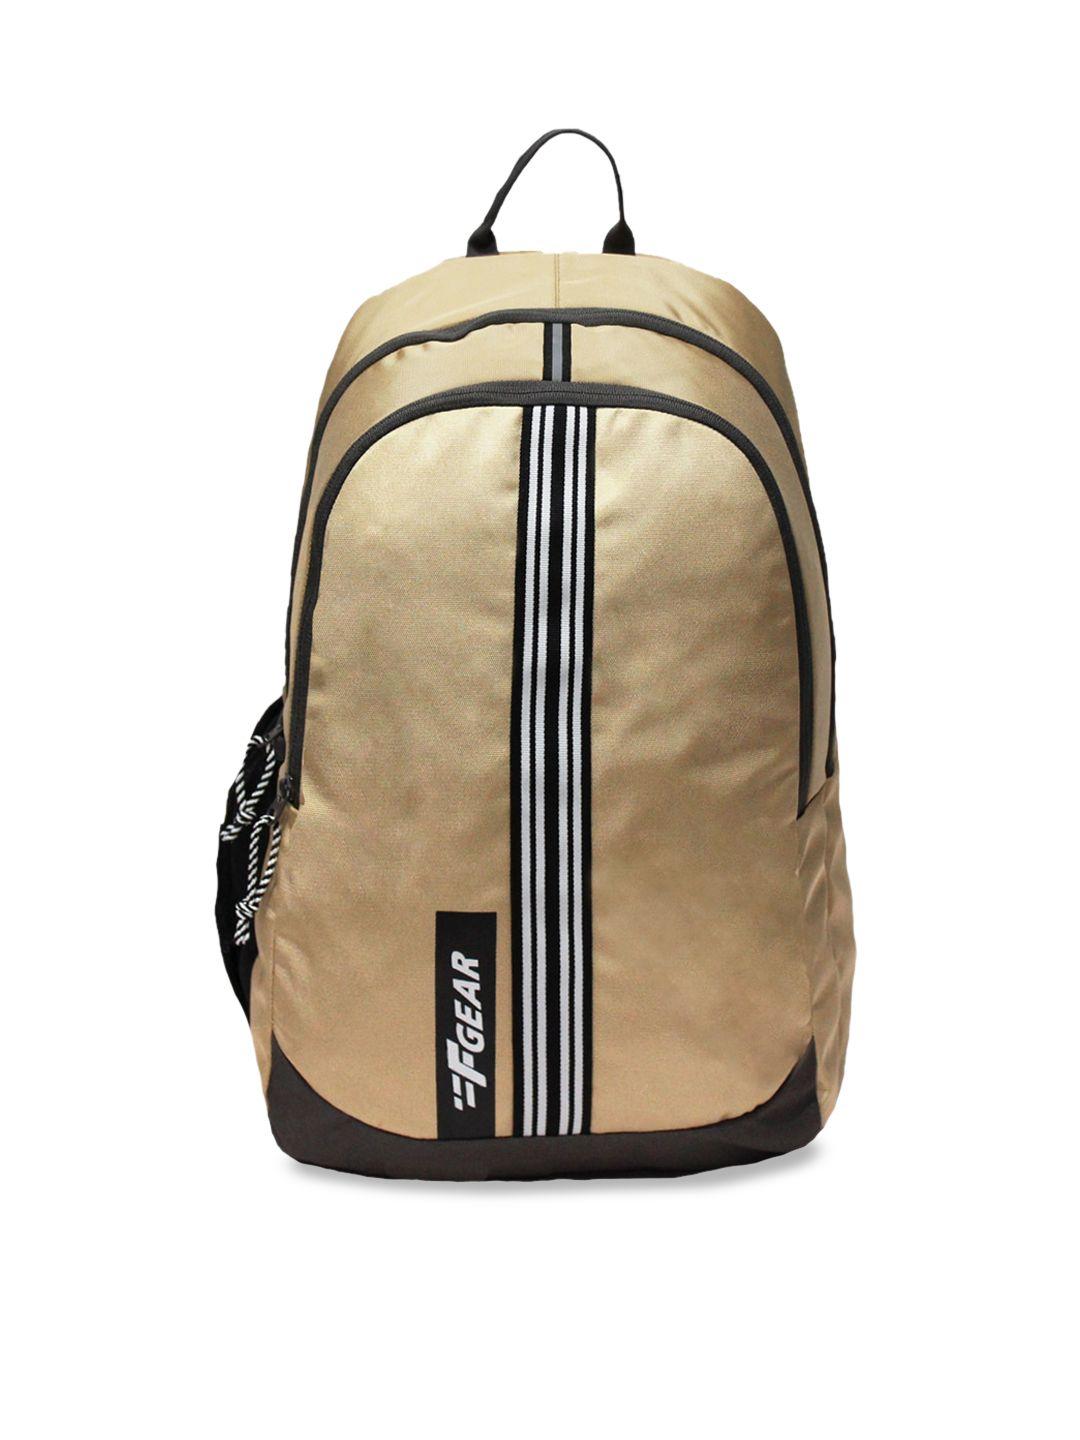 f gear unisex cream-coloured & black contrast detail backpack